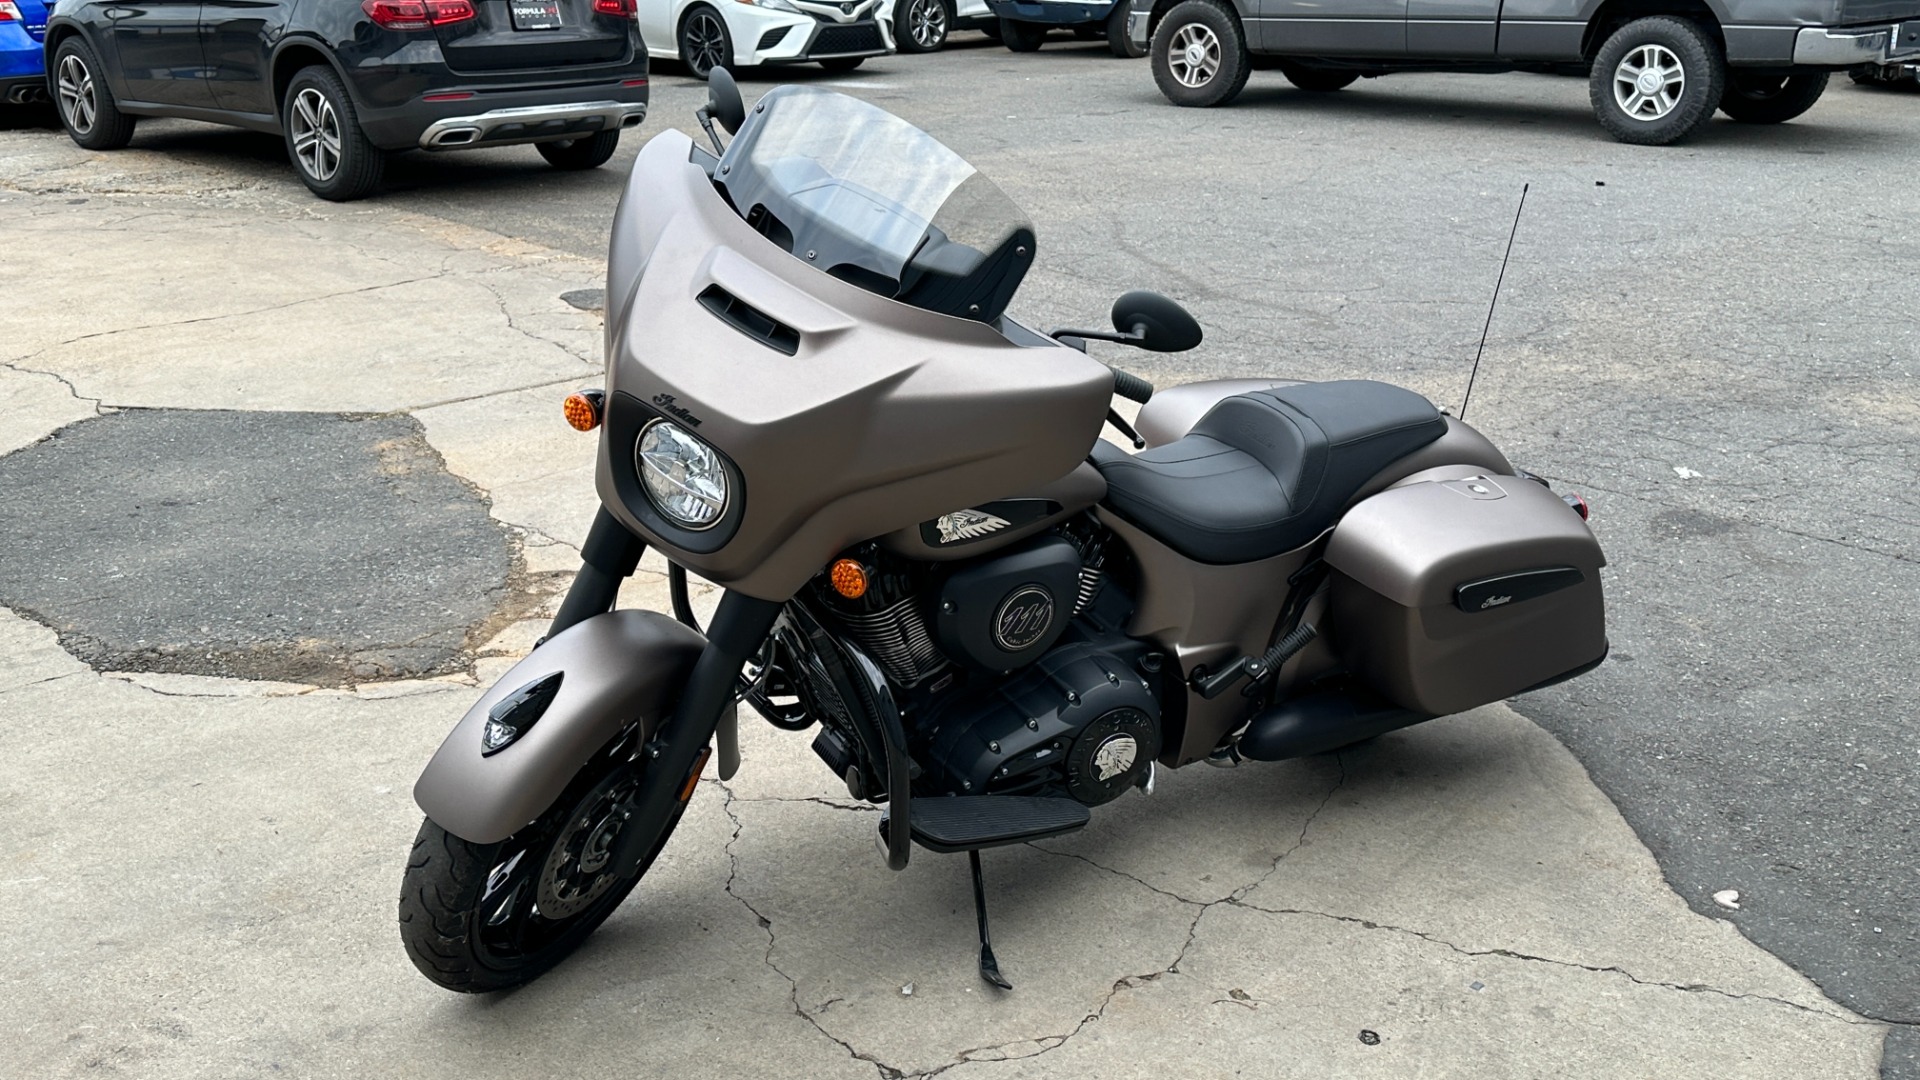 Used 2019 INDIAN CHIEFTAIN DARK HORSE / MATTE PAINT / LOW MILES / NAV / CRUISE CONTROL / TOUCHSCREEN for sale $23,999 at Formula Imports in Charlotte NC 28227 4